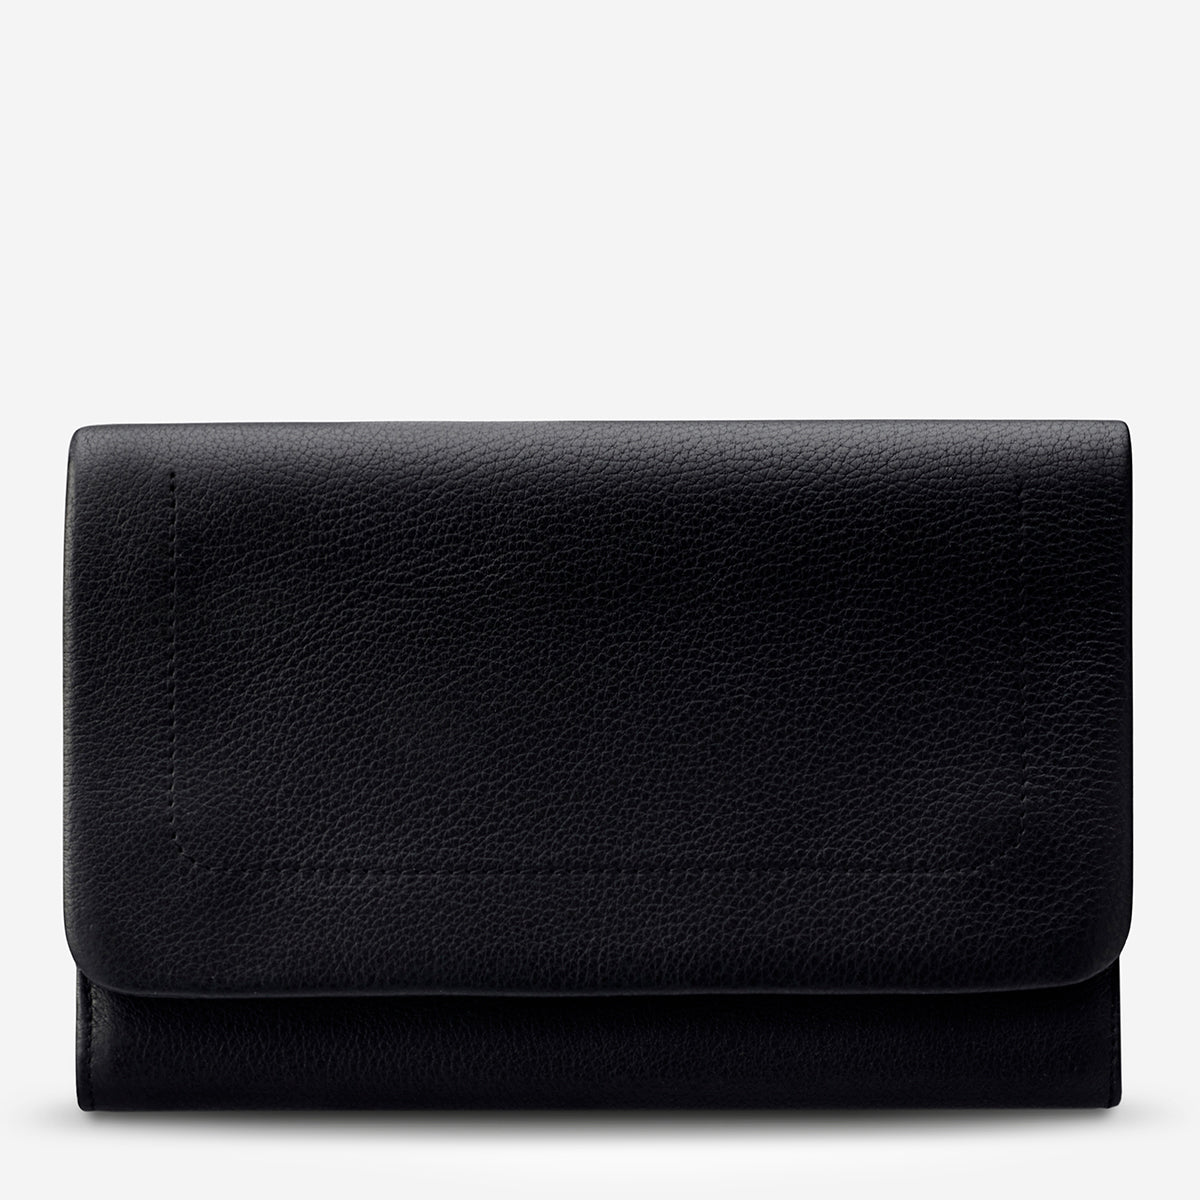 Status Anxiety Remnant Women's Leather Wallet Black